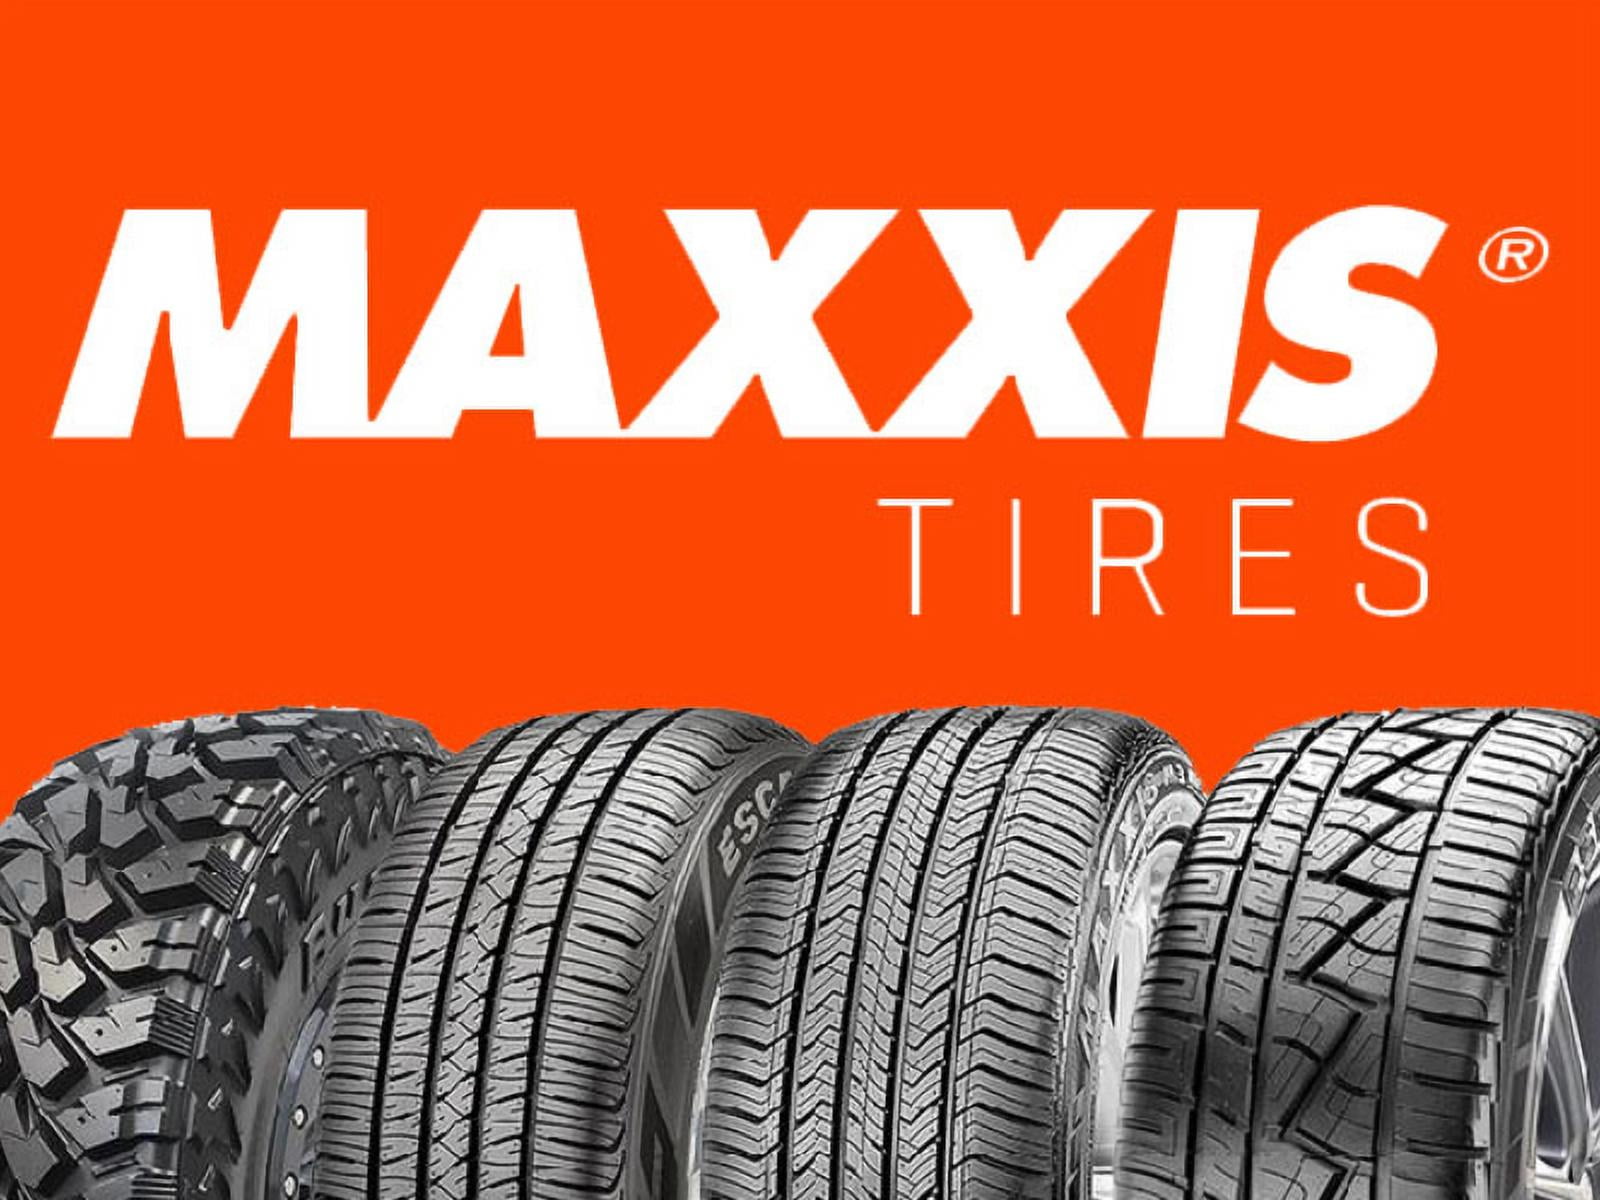 Maxxis отзывы лето. Maxxis. Maxxis Tires. Maxxis шины логотип. Максис МТ.